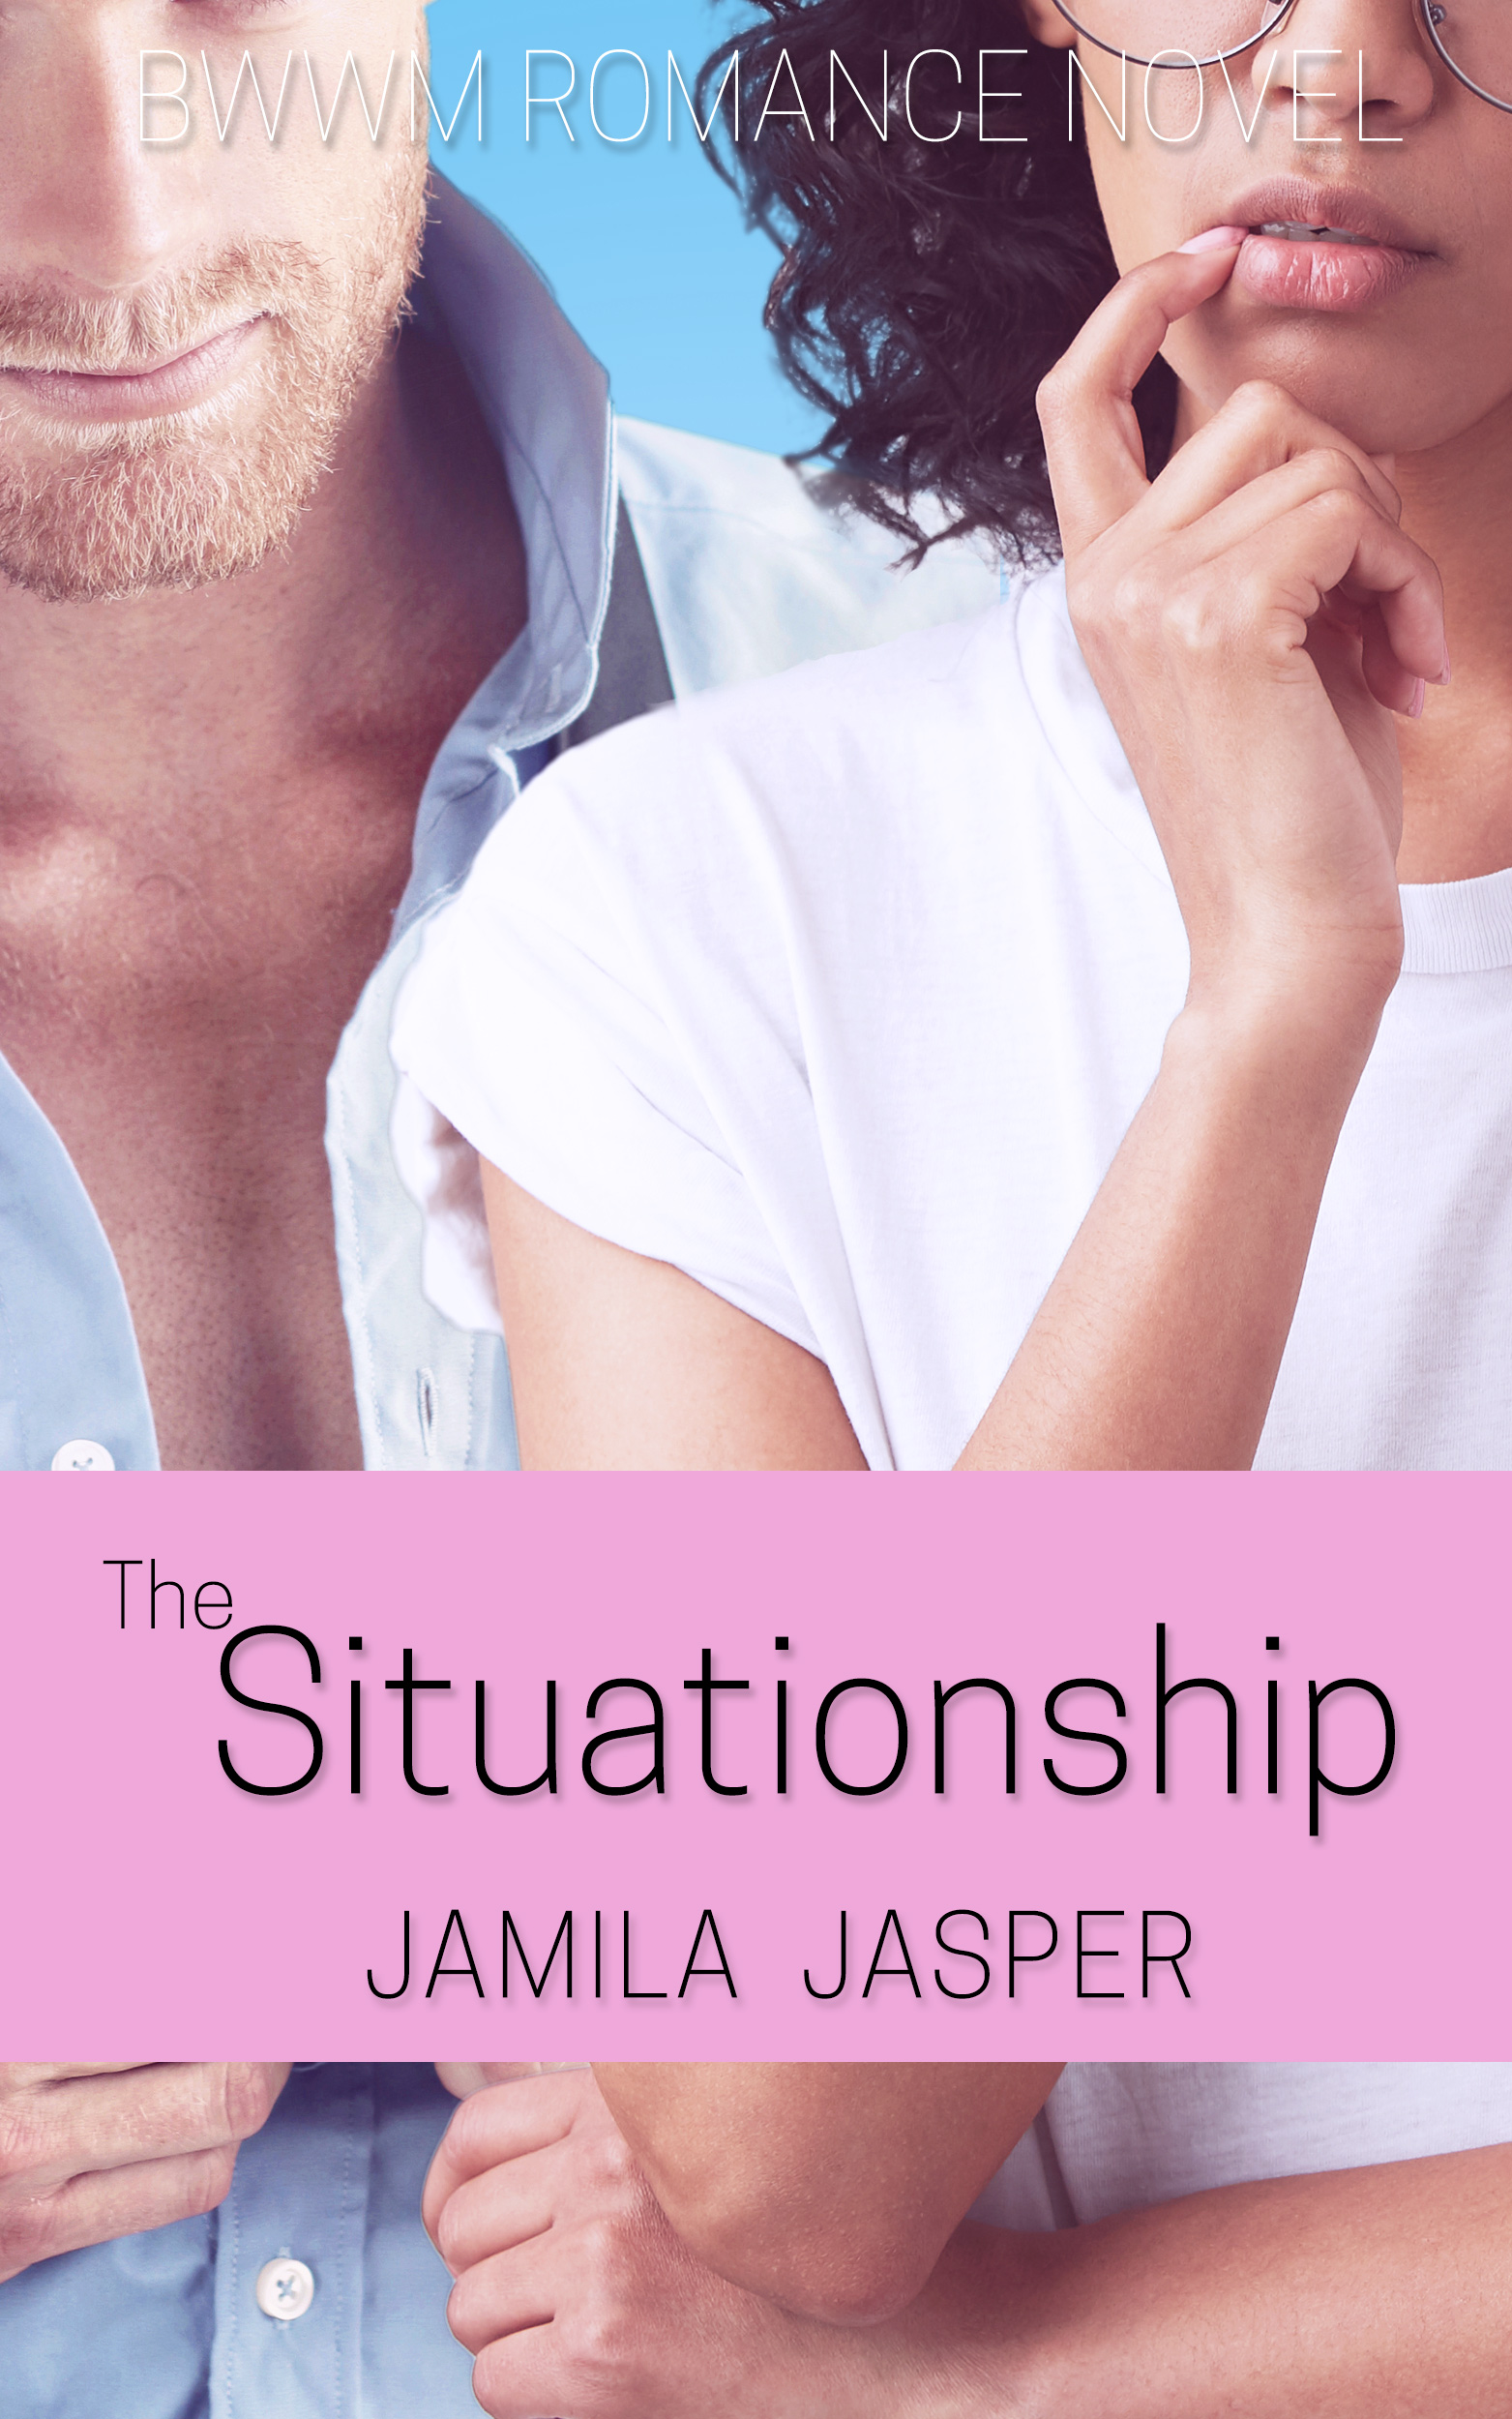 the situationship romance novel excerpts bwwm